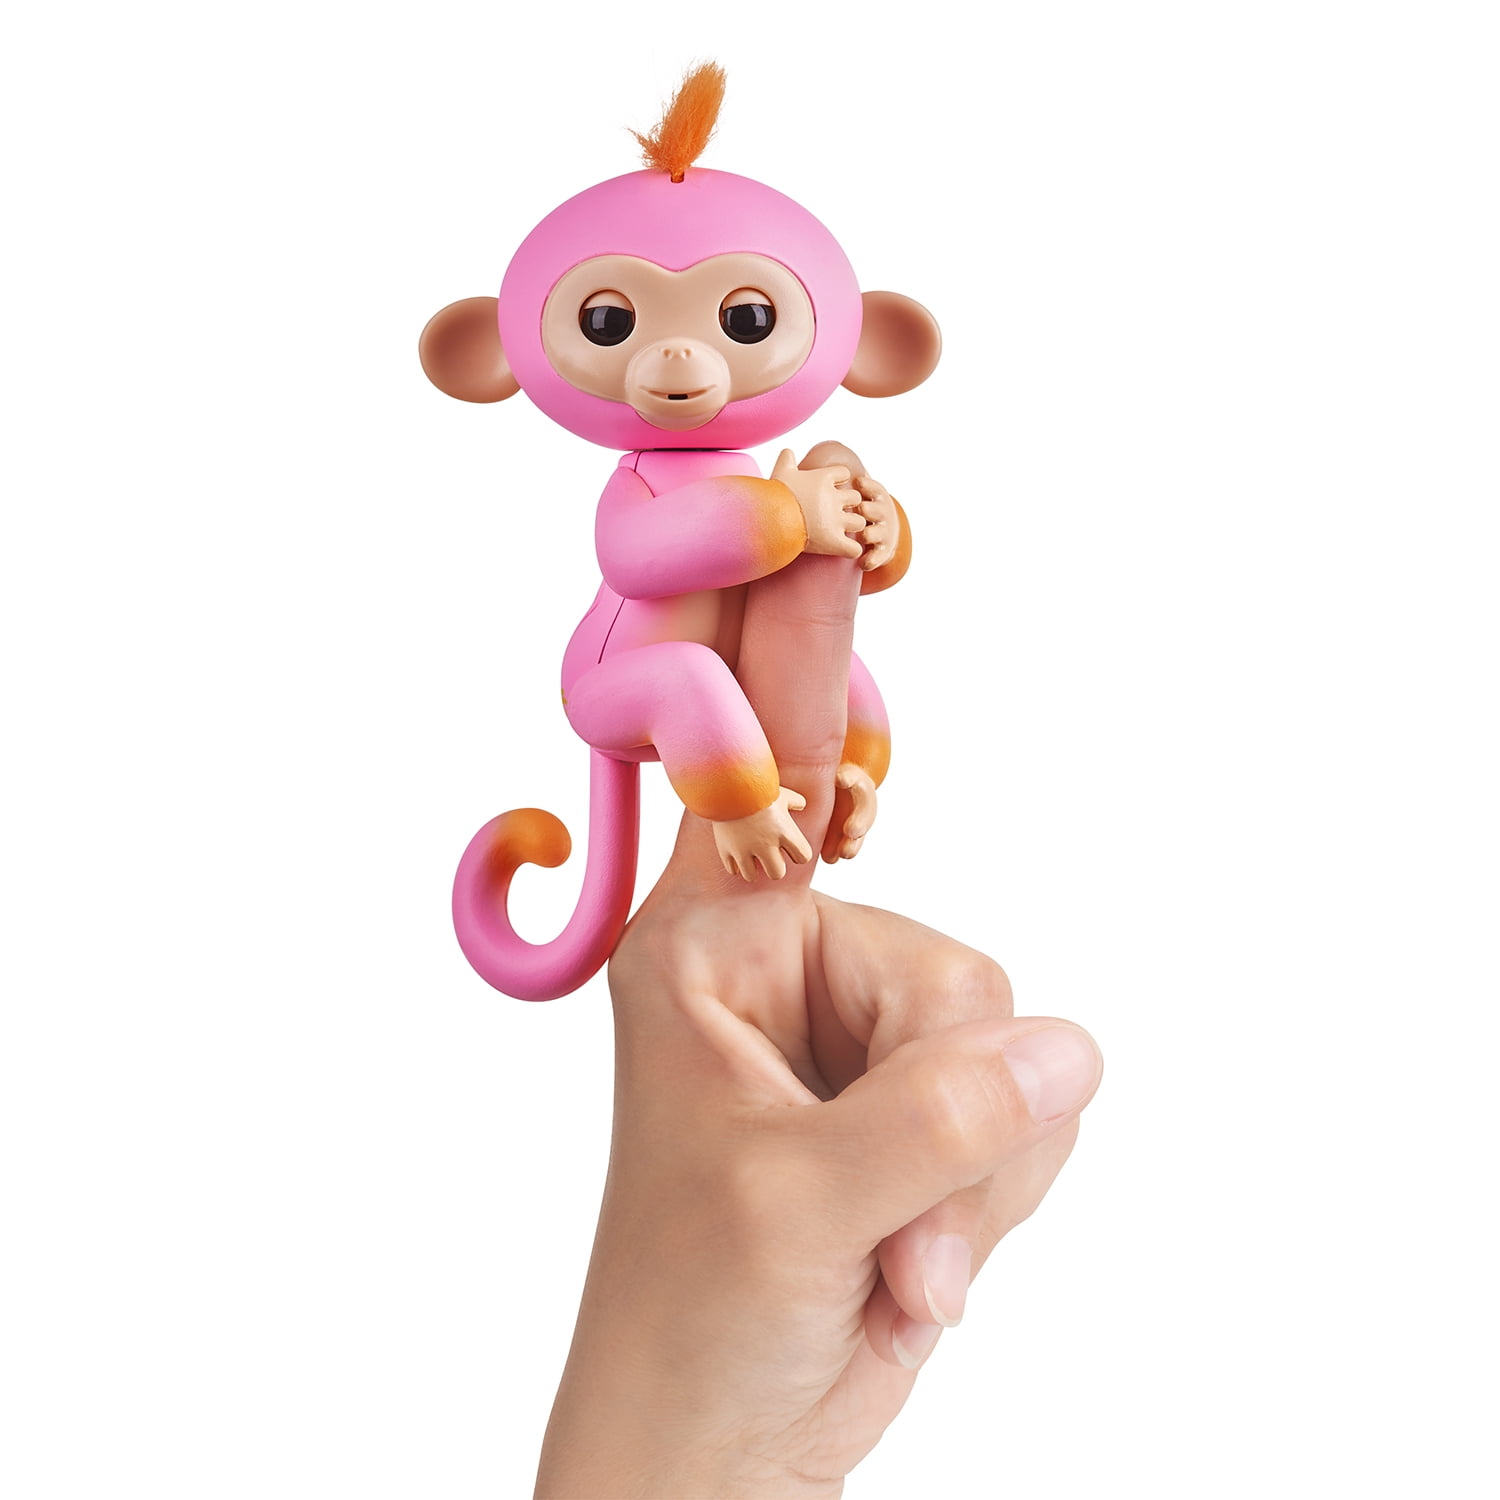 Bella New Authentic WowWee Fingerlings Monkey Electronic Interactive 